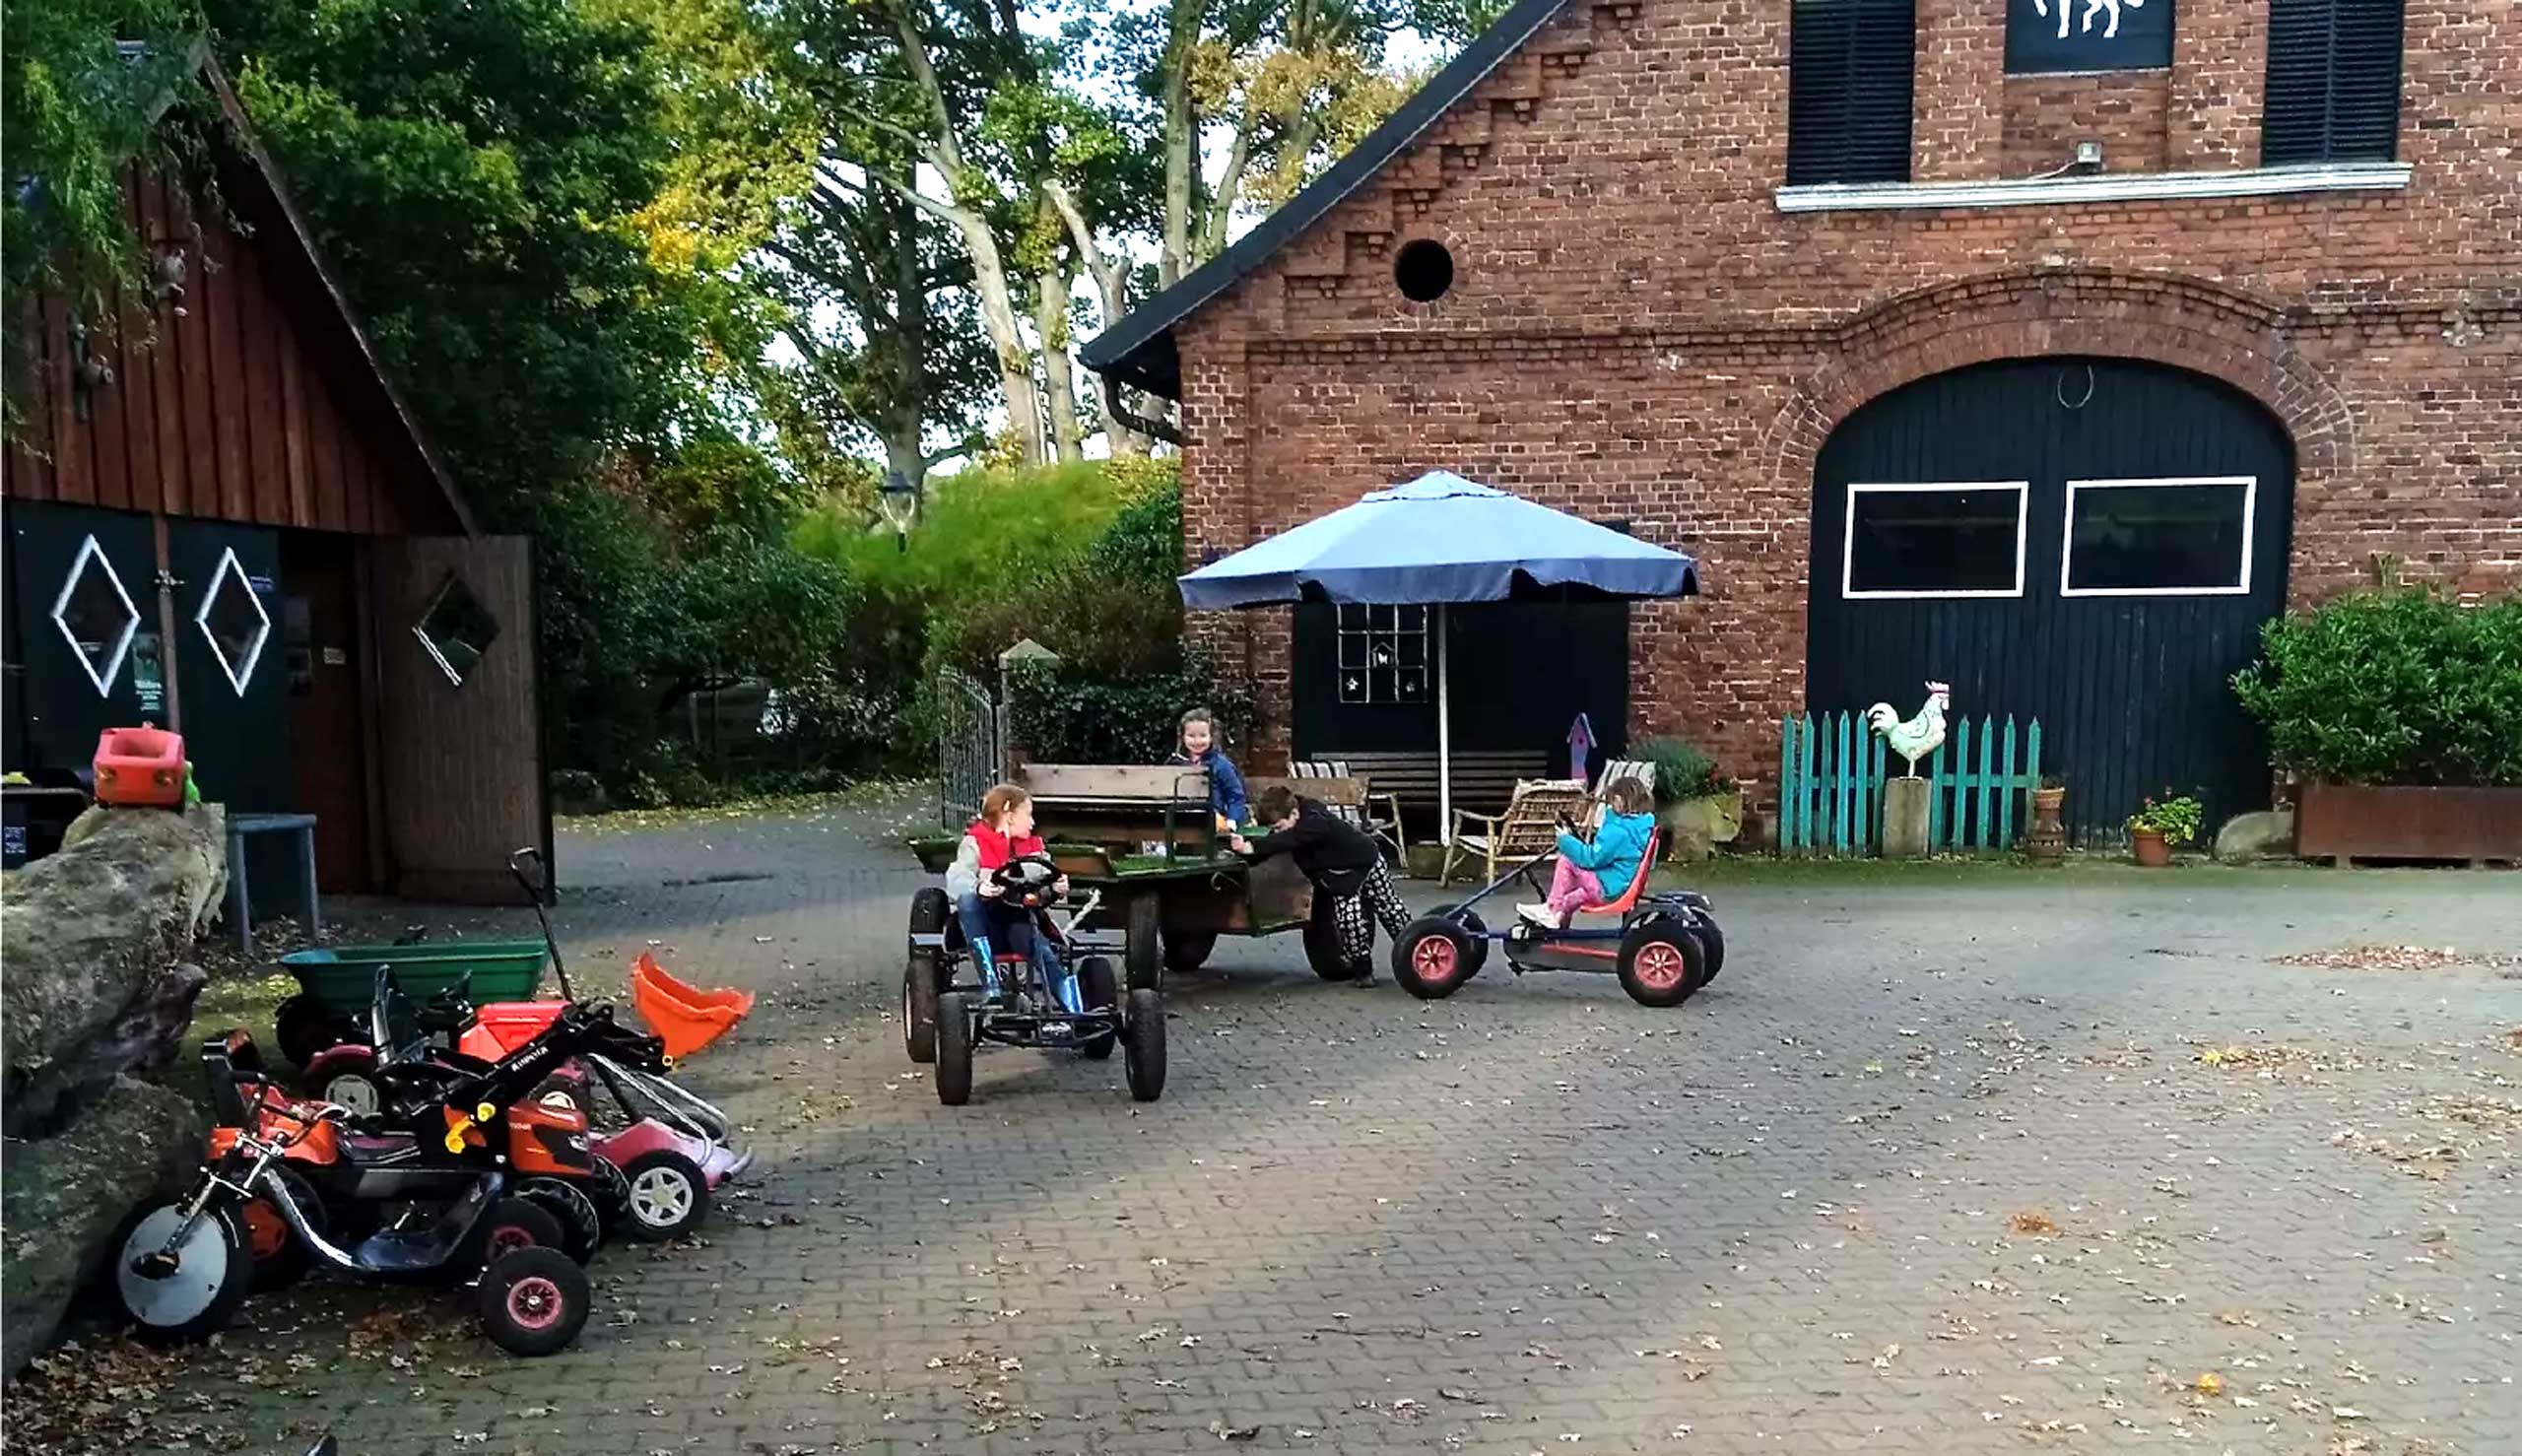 At the vacation farm there is an exciting social program for children with vehicles, playground, and pool. Copyright: Holiday farm Haselheide 